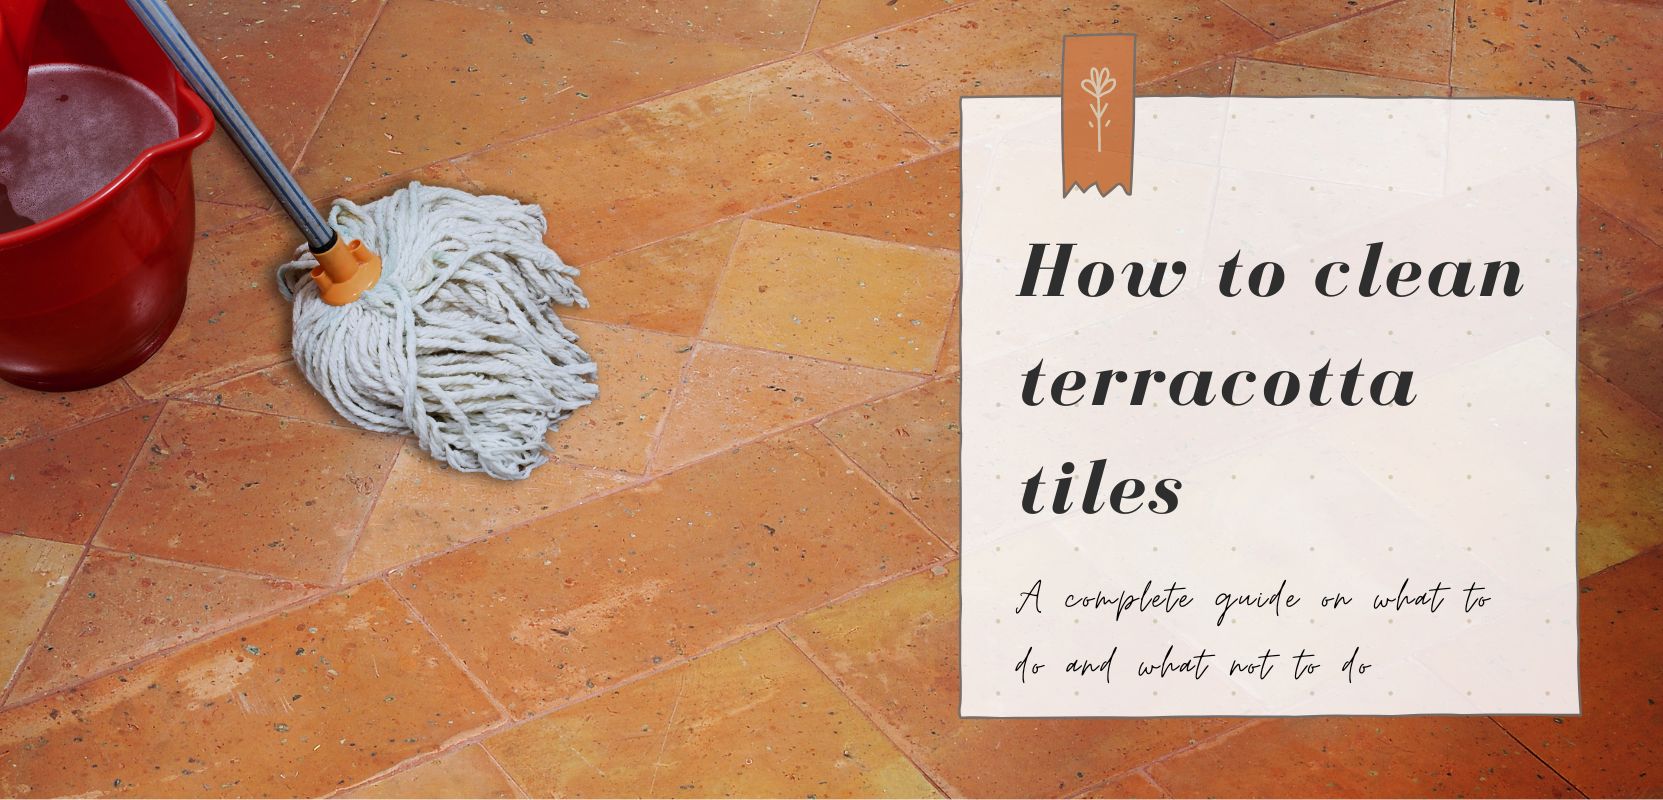 How to clean cotto tiles